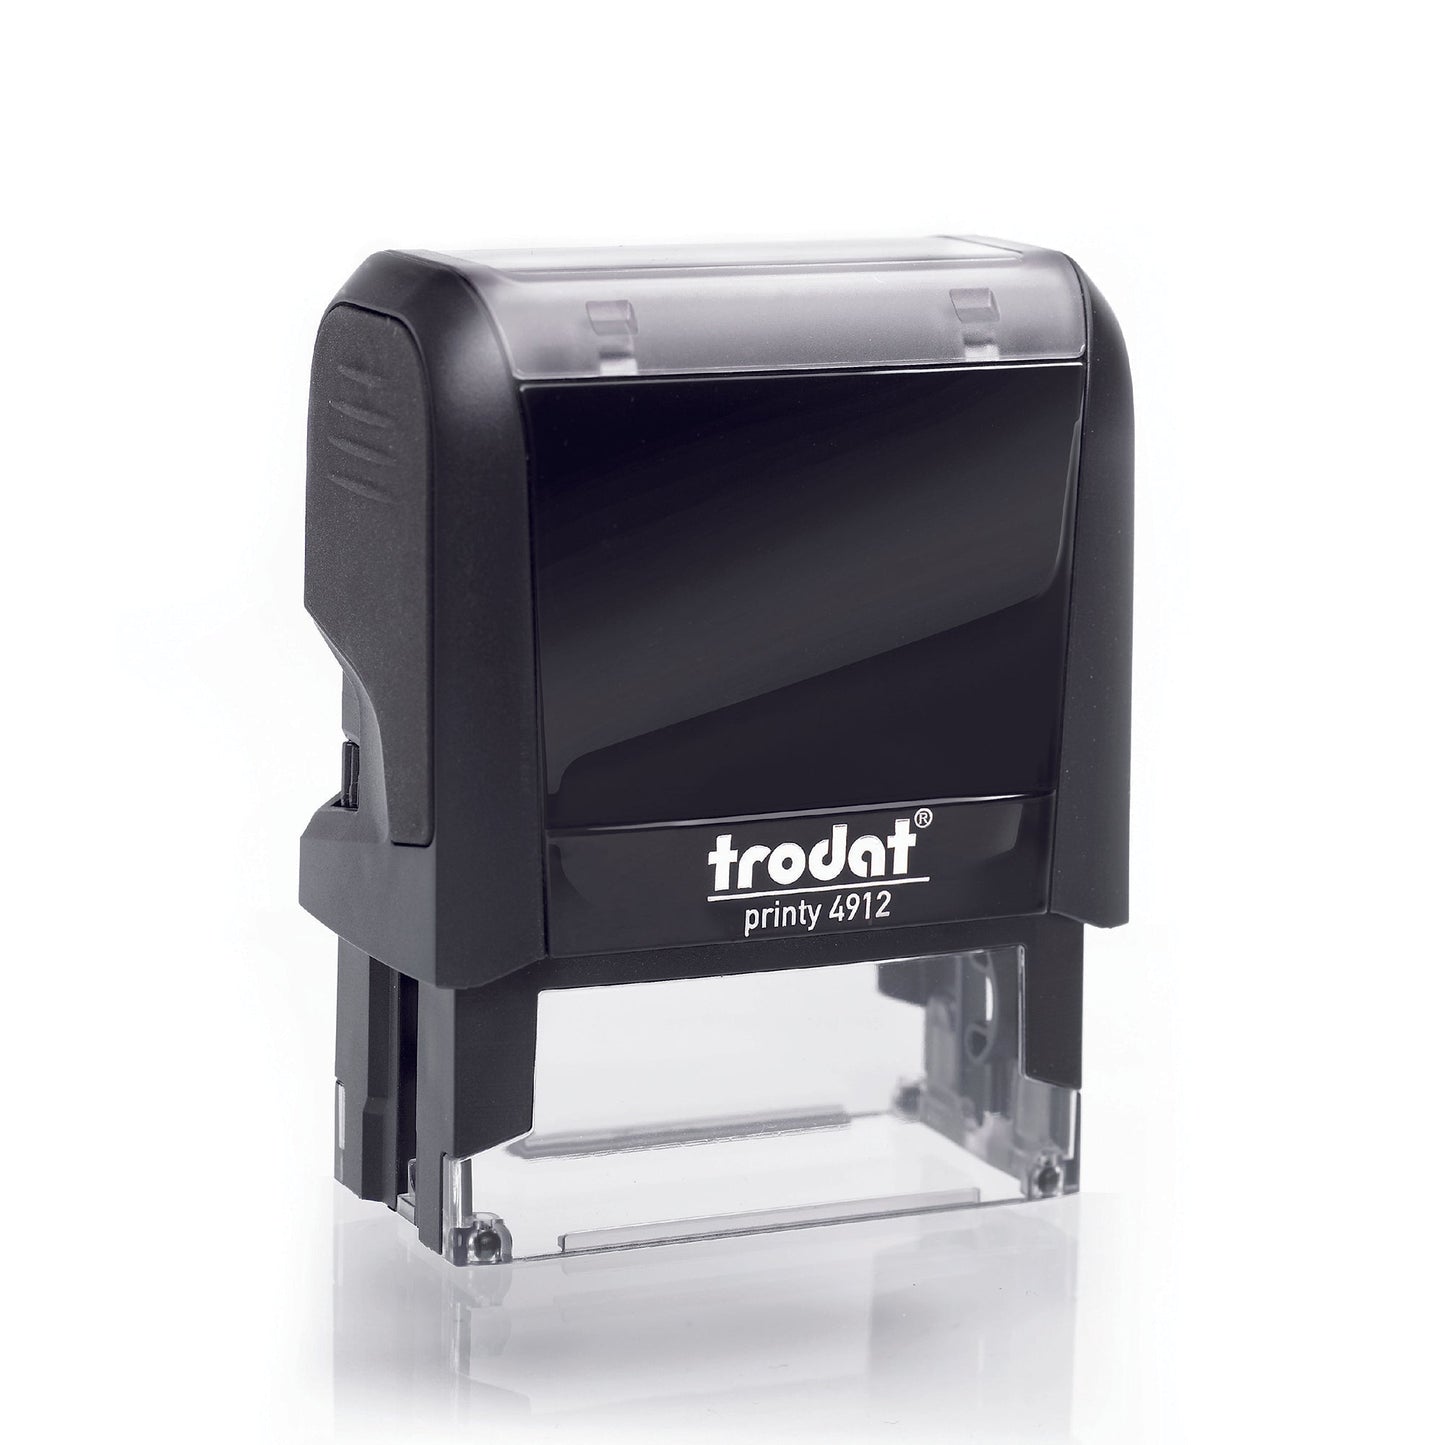 Authorised Outline - Rubber Stamp - Trodat 4912 - 47mm x 18mm Impression